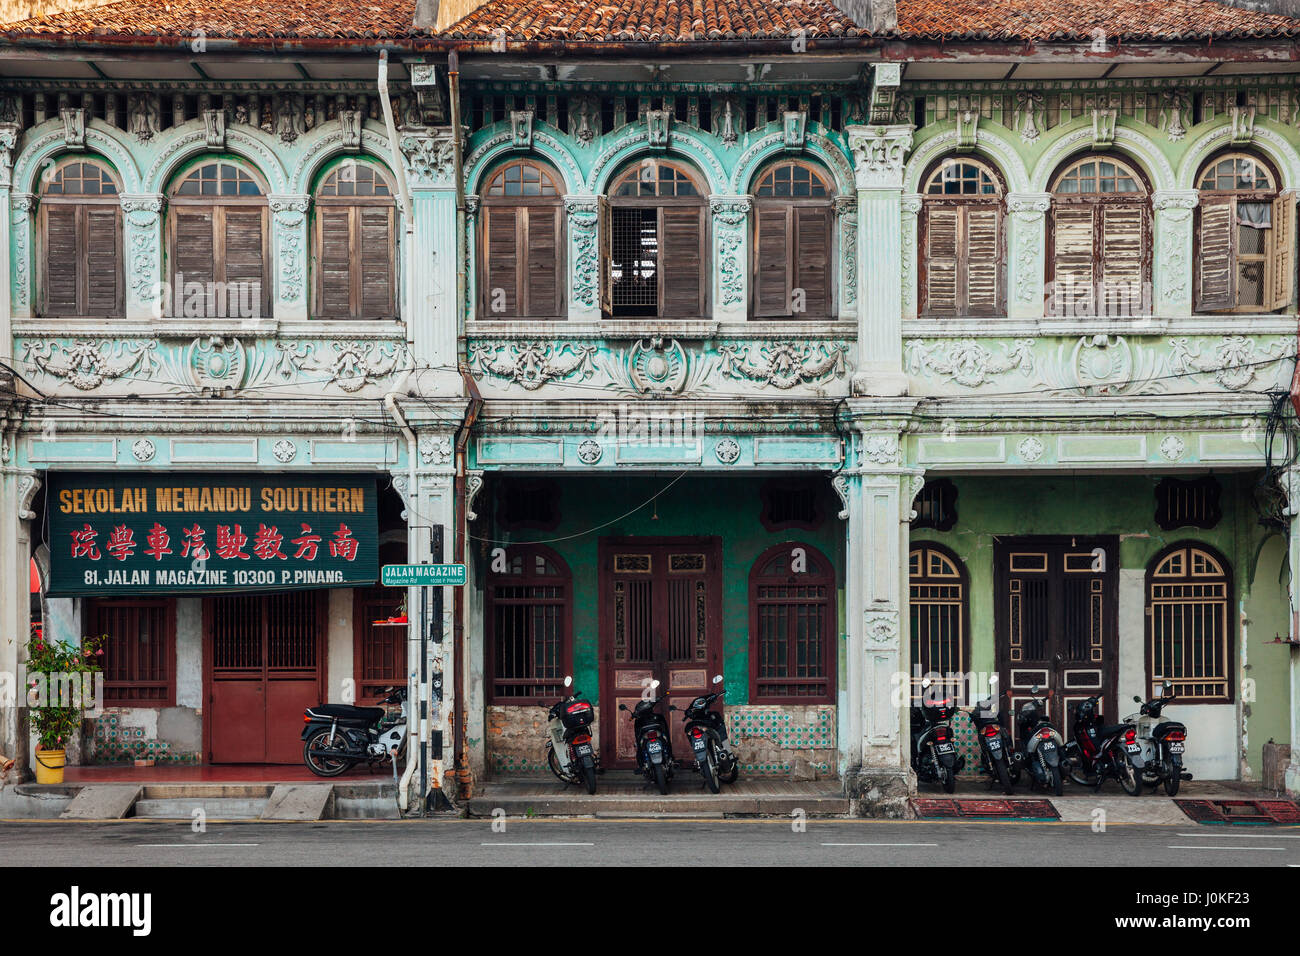 George Town, Malaysia - March 27, 2016: Facade of the old building located in UNESCO Heritage Buffer Zone, George Town, Penang, Malaysia on March 27,  Stock Photo